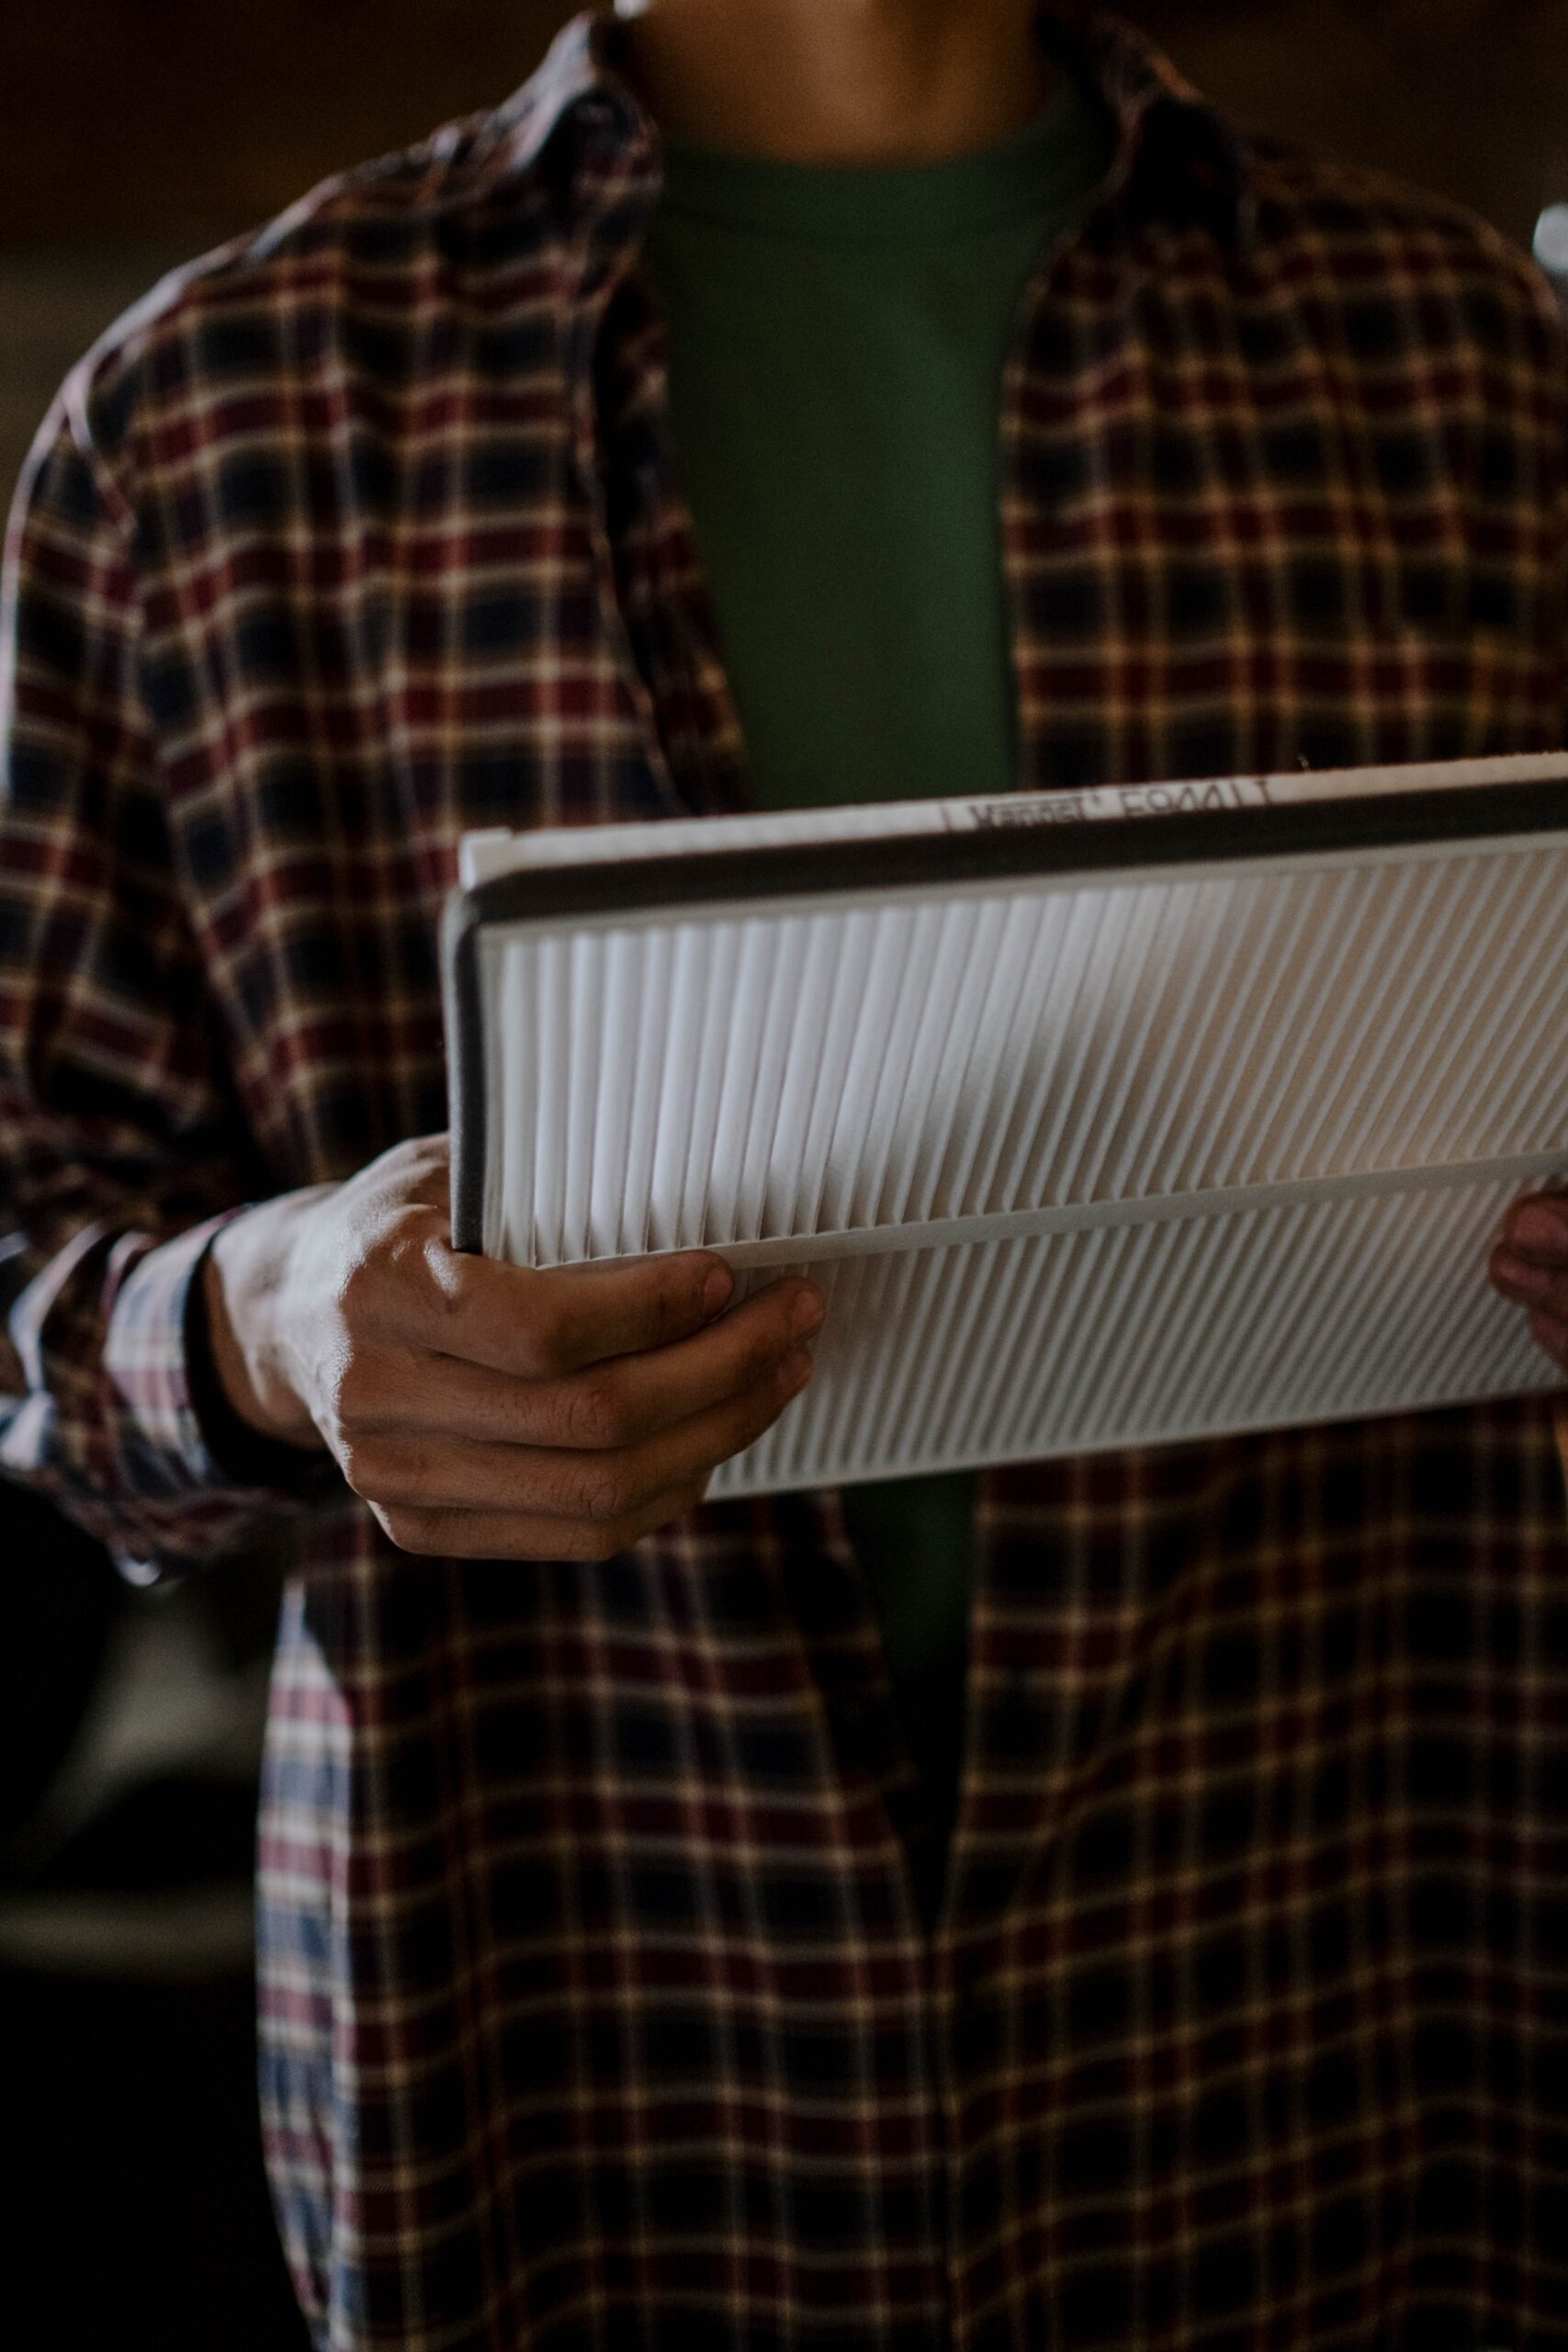 A person holding a new cabin filter